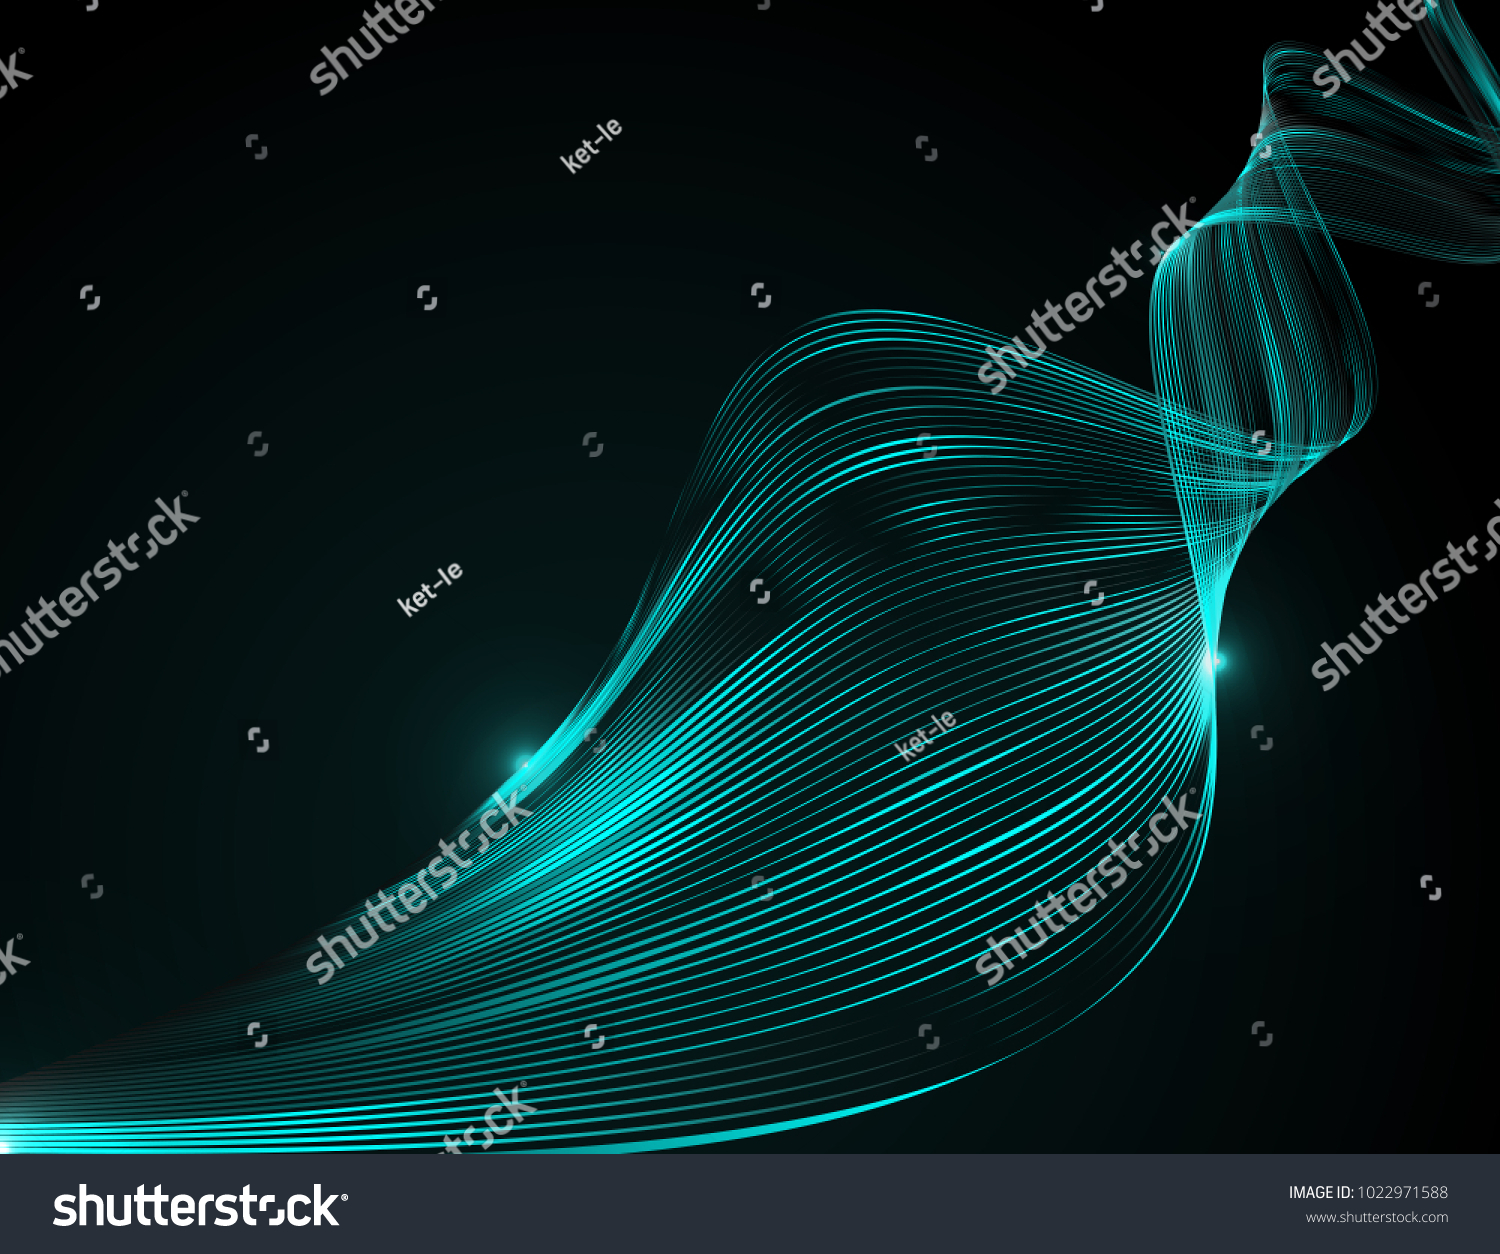 Abstract bright wavy lines on a dark blue background Futuristic technology illustration design The pattern of the wave line Abstract modern background for web site business Graphics Raster image #1022971588